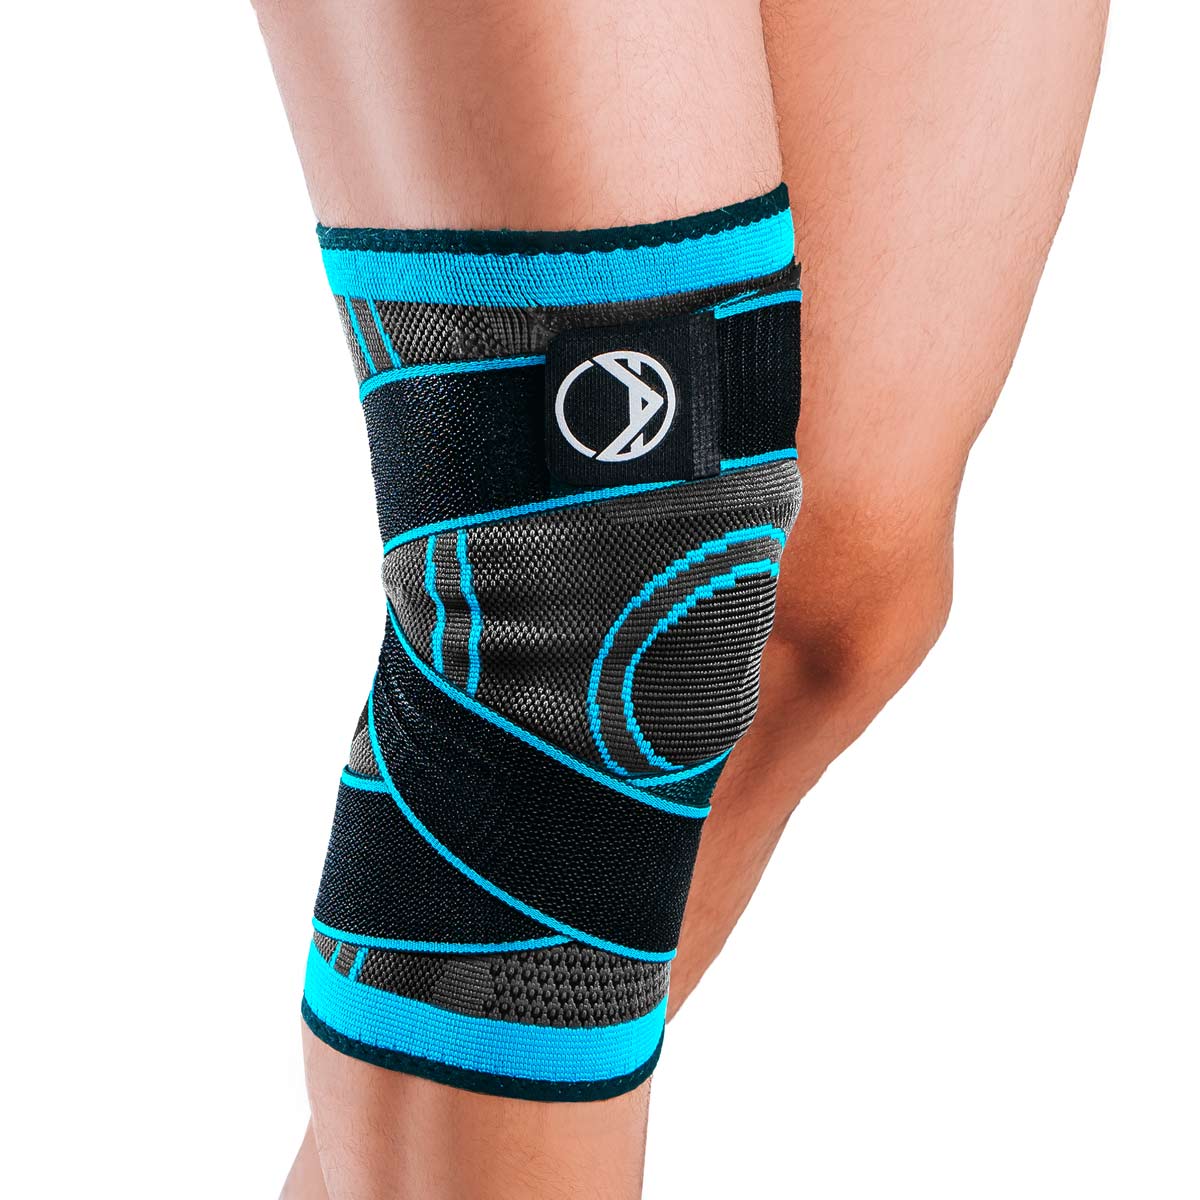 The Benefits of Using a Knee Compression 1. Stability and Support 2.  Reduced Swelling 3. Pain Relief 4. Enhanced Recove…